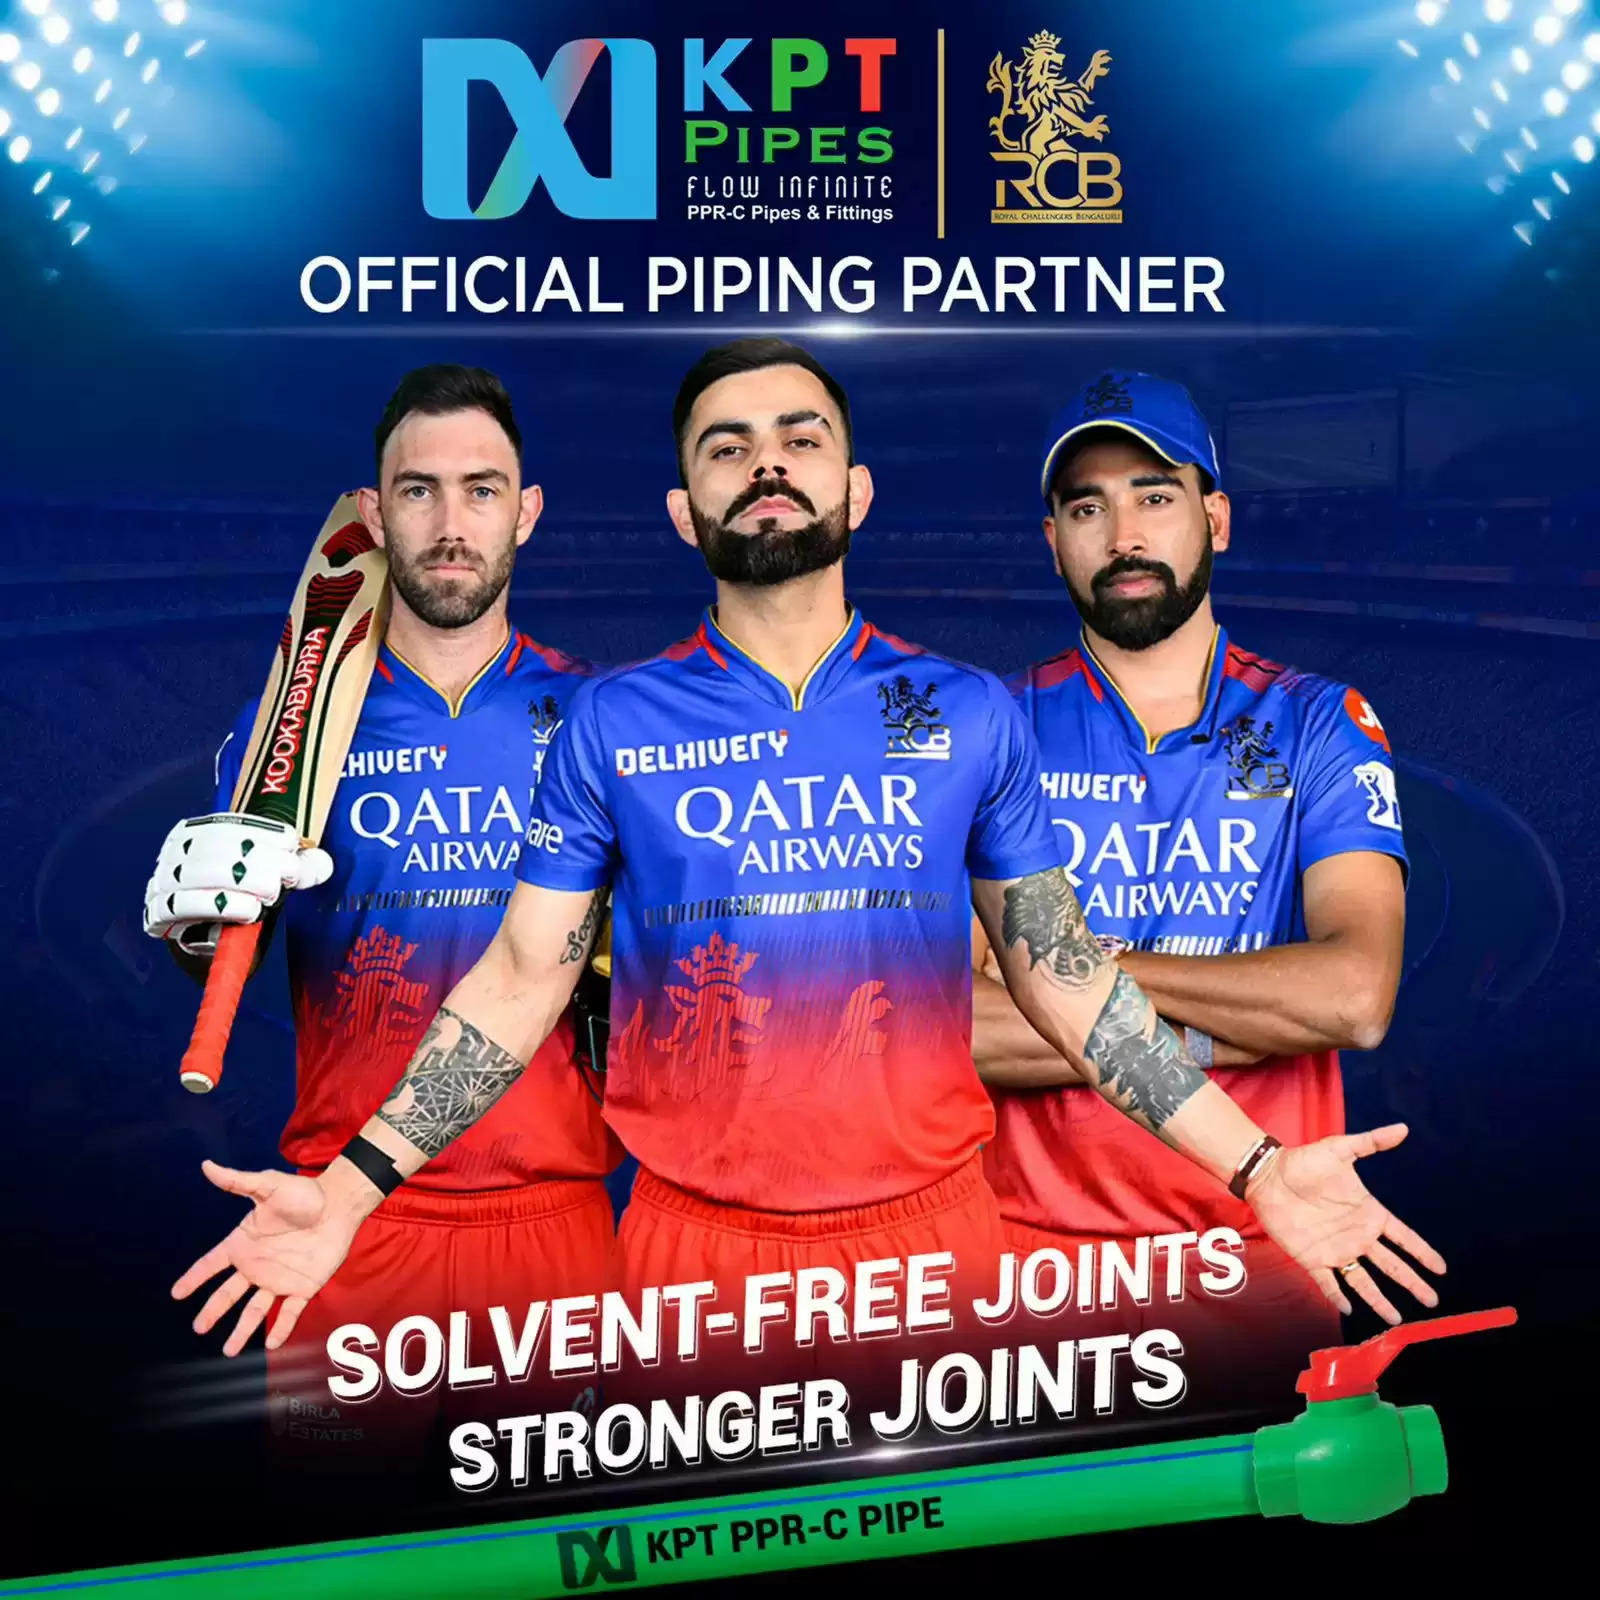 KPT Pipes Teams Up with Royal Challengers Bengaluru as their Official Piping Partner for the upcoming Indian Cricket T20 League